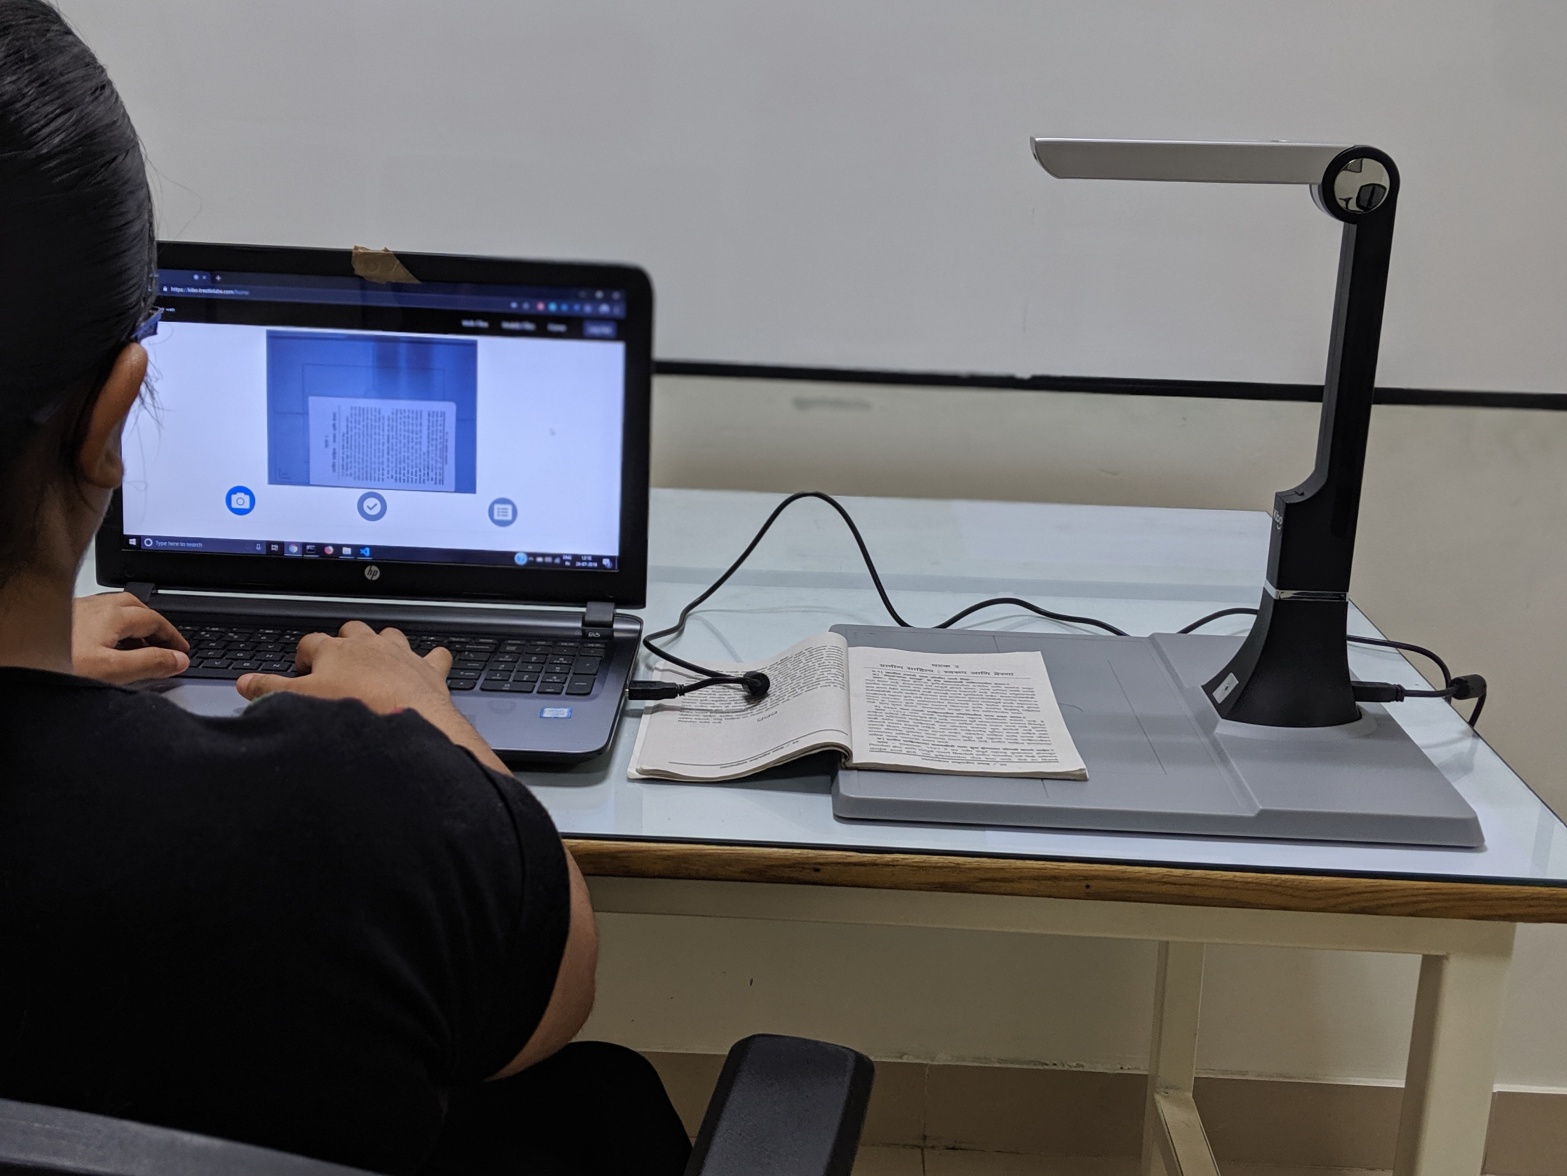 A person scanning book on a system through KIBO XS device.